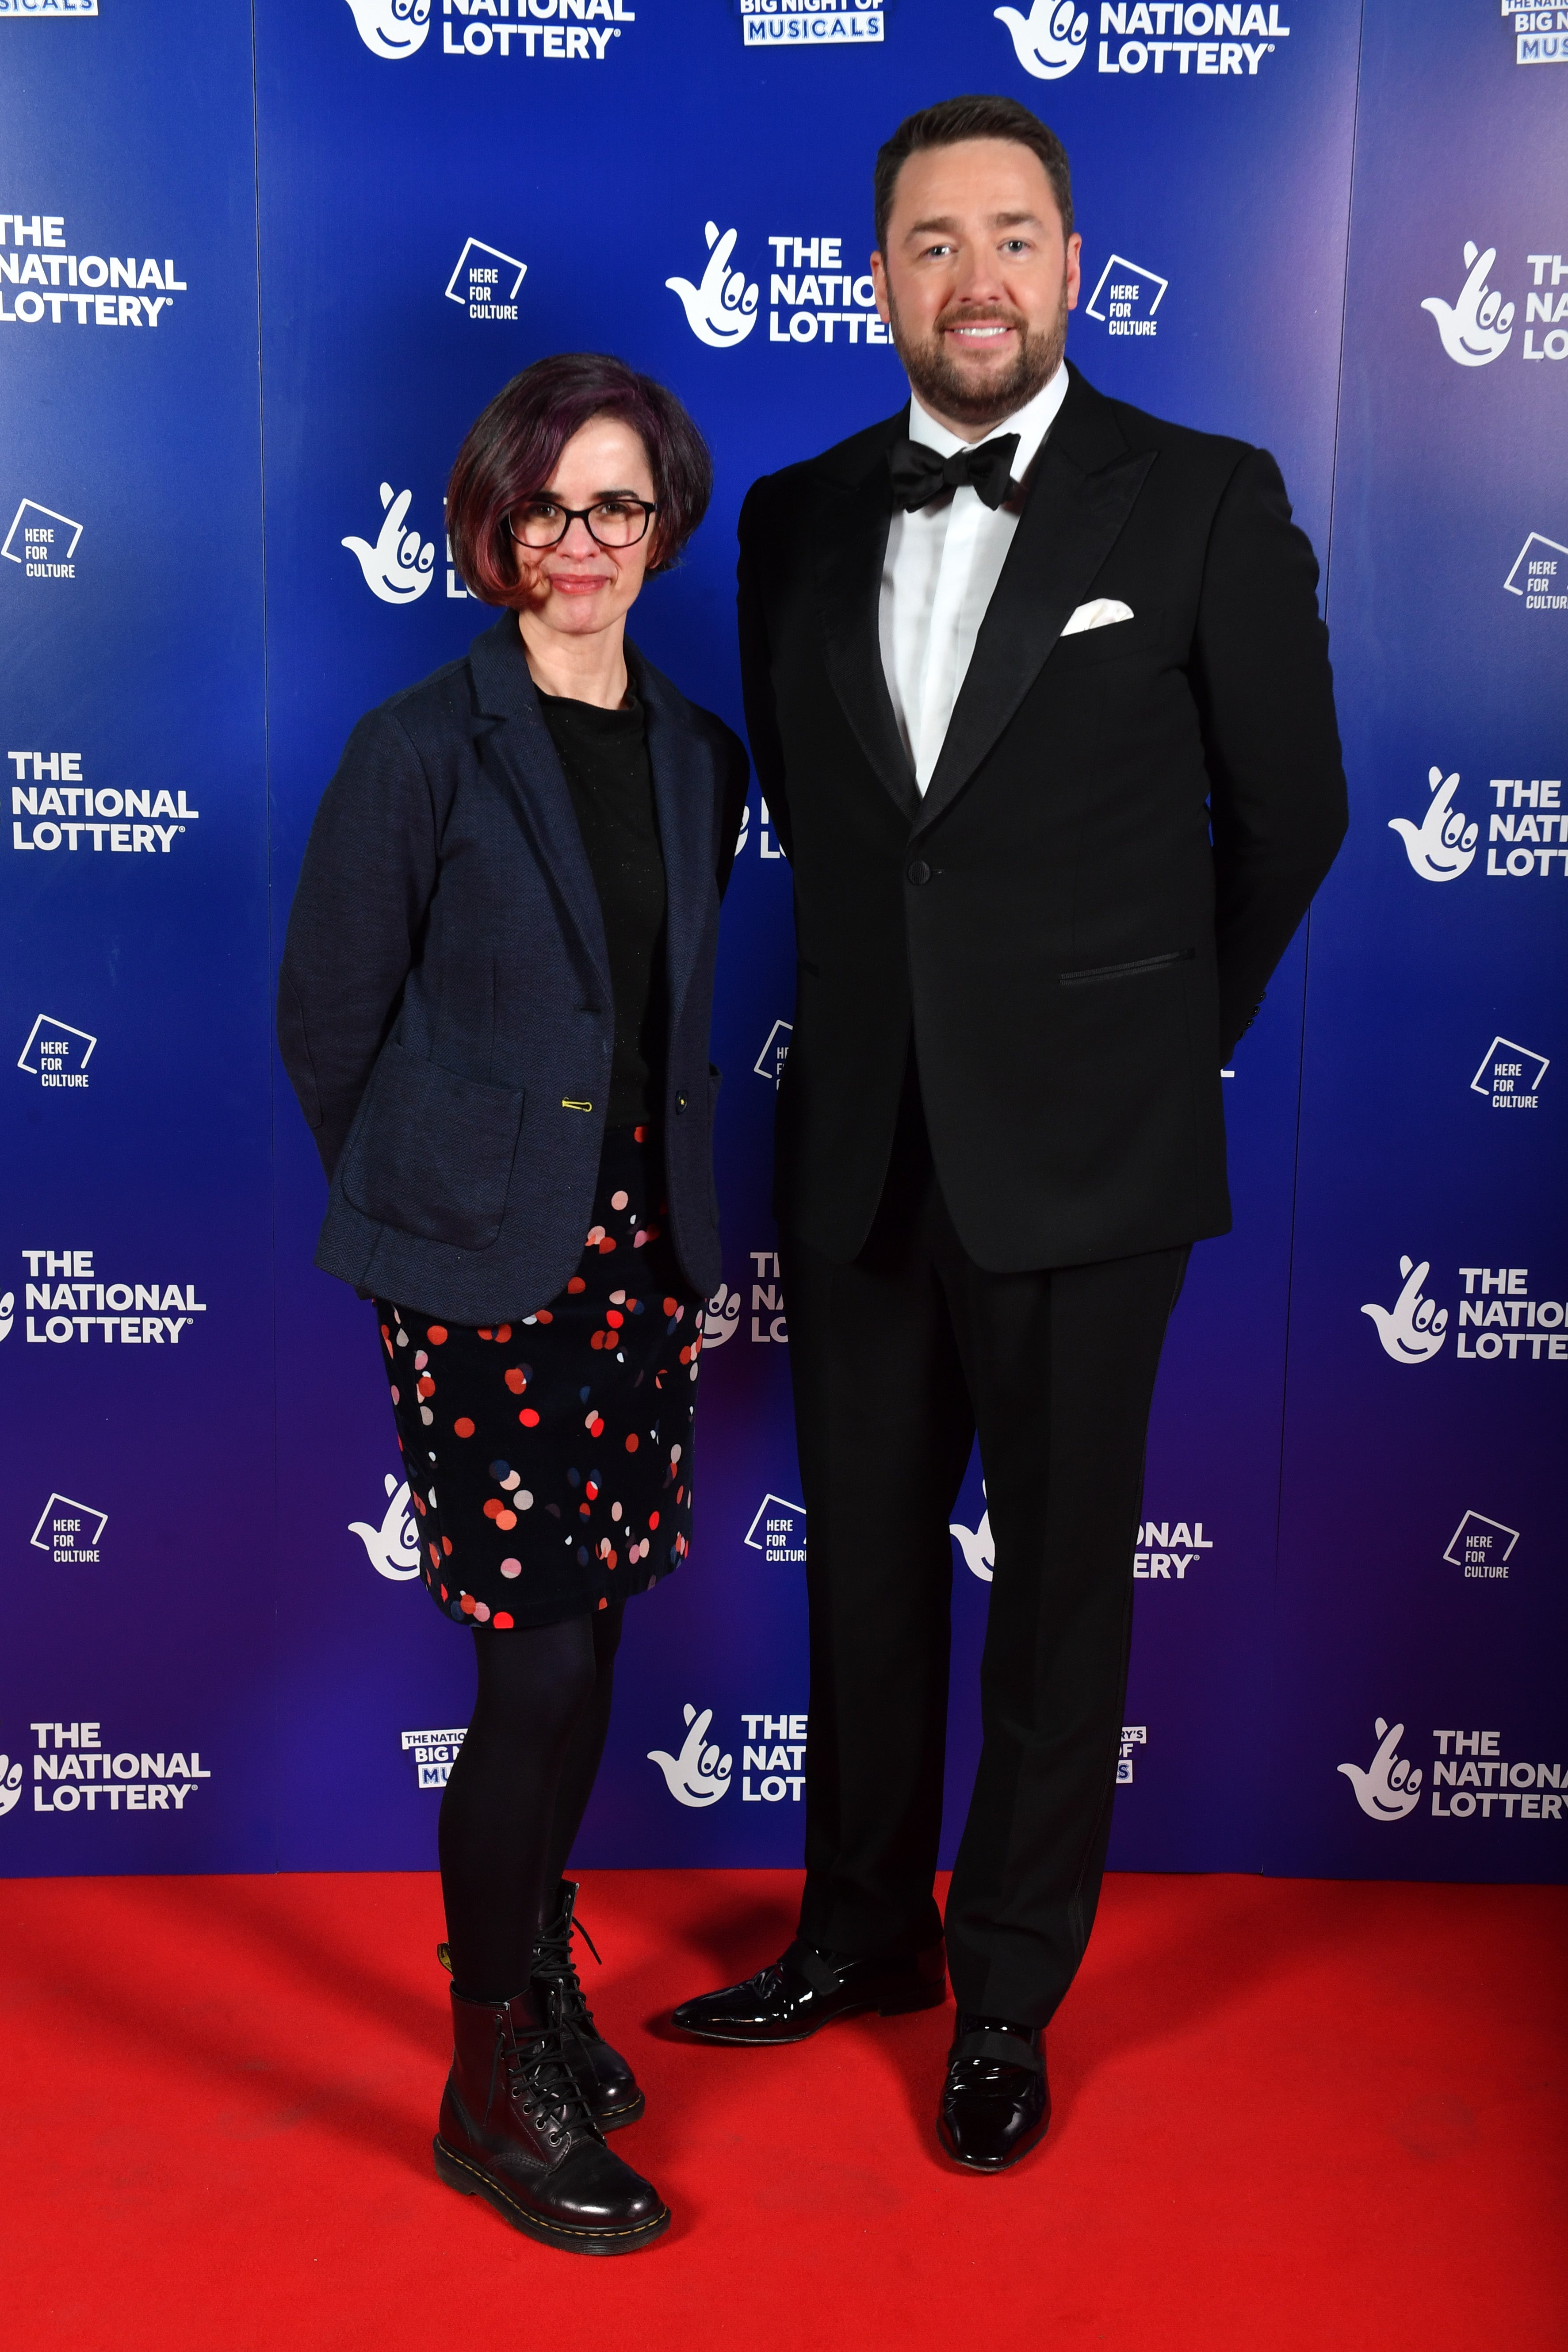 Claire Morris, co-founder of Fallen Angels dance charity, meets Jason Manford on the red carpet of the National Lottery’s Big Night of Musicals. (Anthony Devlin/Getty Images for The National Lottery /PA)